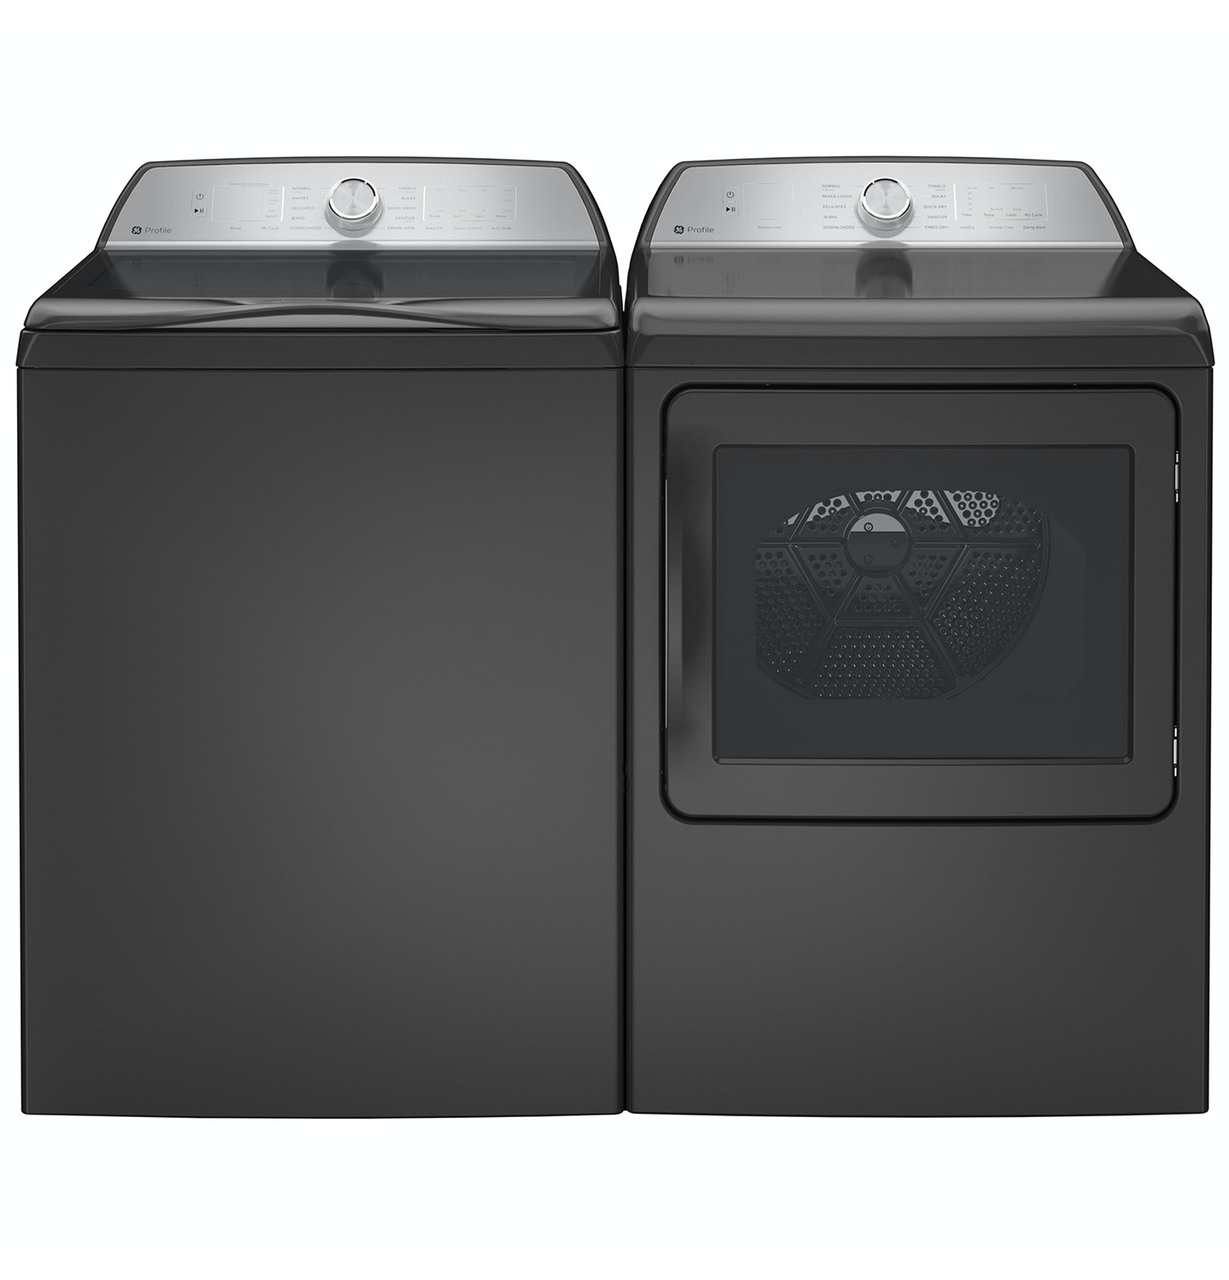 PTW605BPRDG | PTD60EBPRDG - GE Profile Top Load Laundry Pair with a 4.9 Cu Ft Top Load Washer with Agitator and a 7.4 Cu Ft Electric Dryer